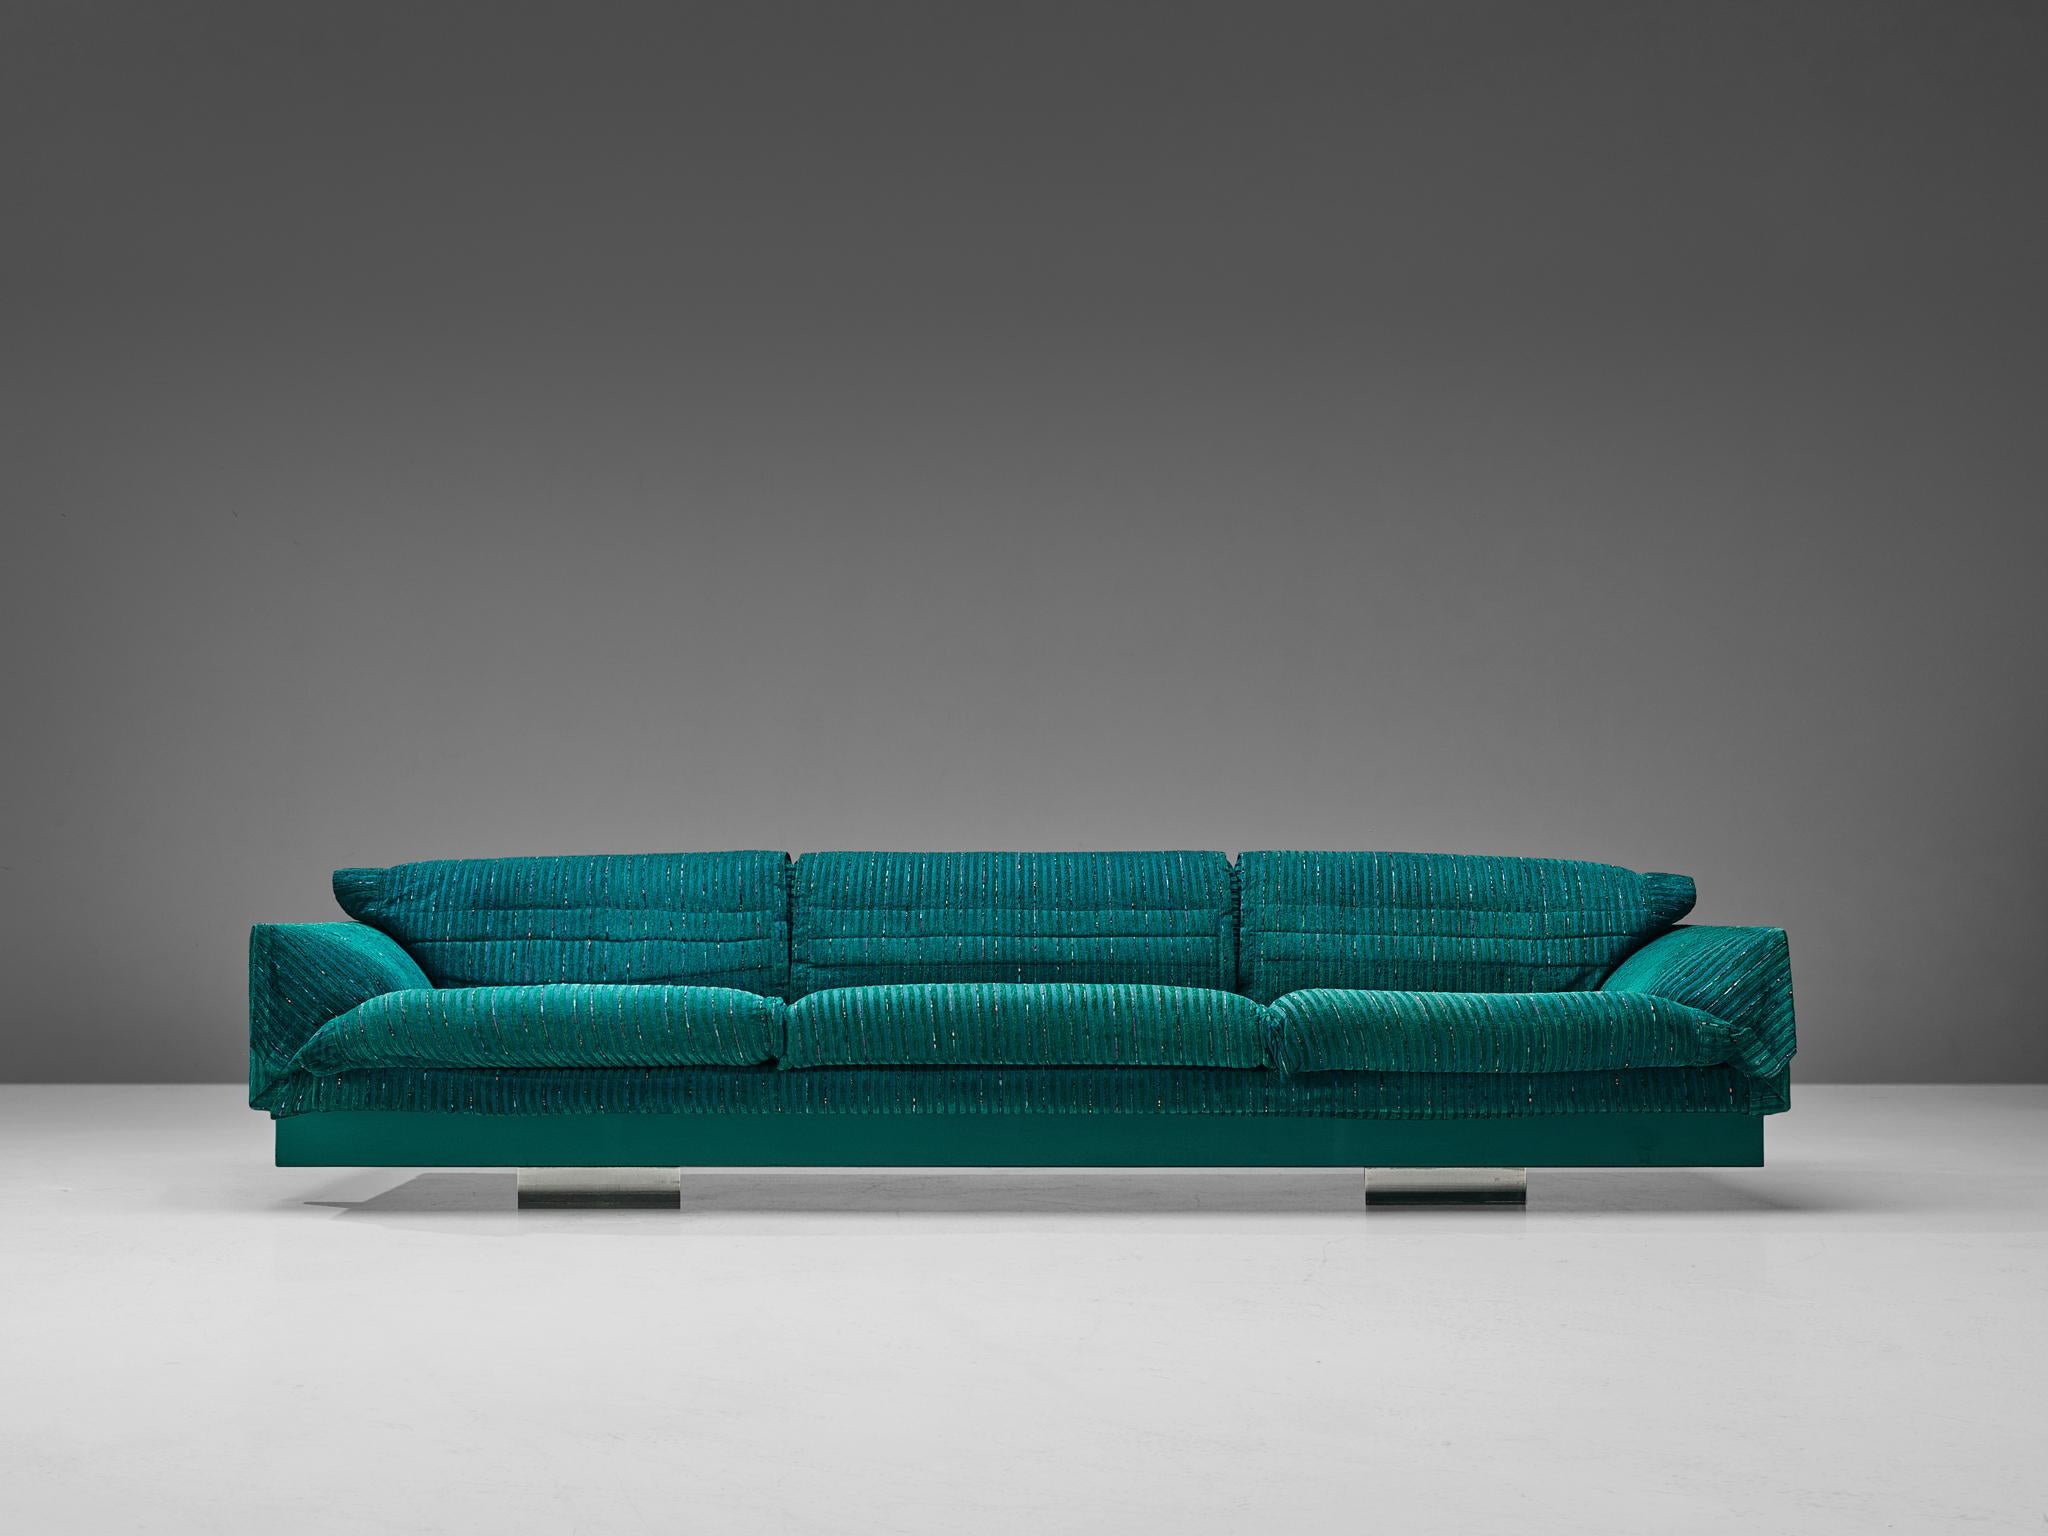 Saporiti, sofa, upholstered in green-blue textured fabric with metal legs, Italy, 1960s.

Large sofa manufactured by Saporiti. This sofa is designed to be comfortable, soft and inviting. It has three seats with round sloping armrest, creating a